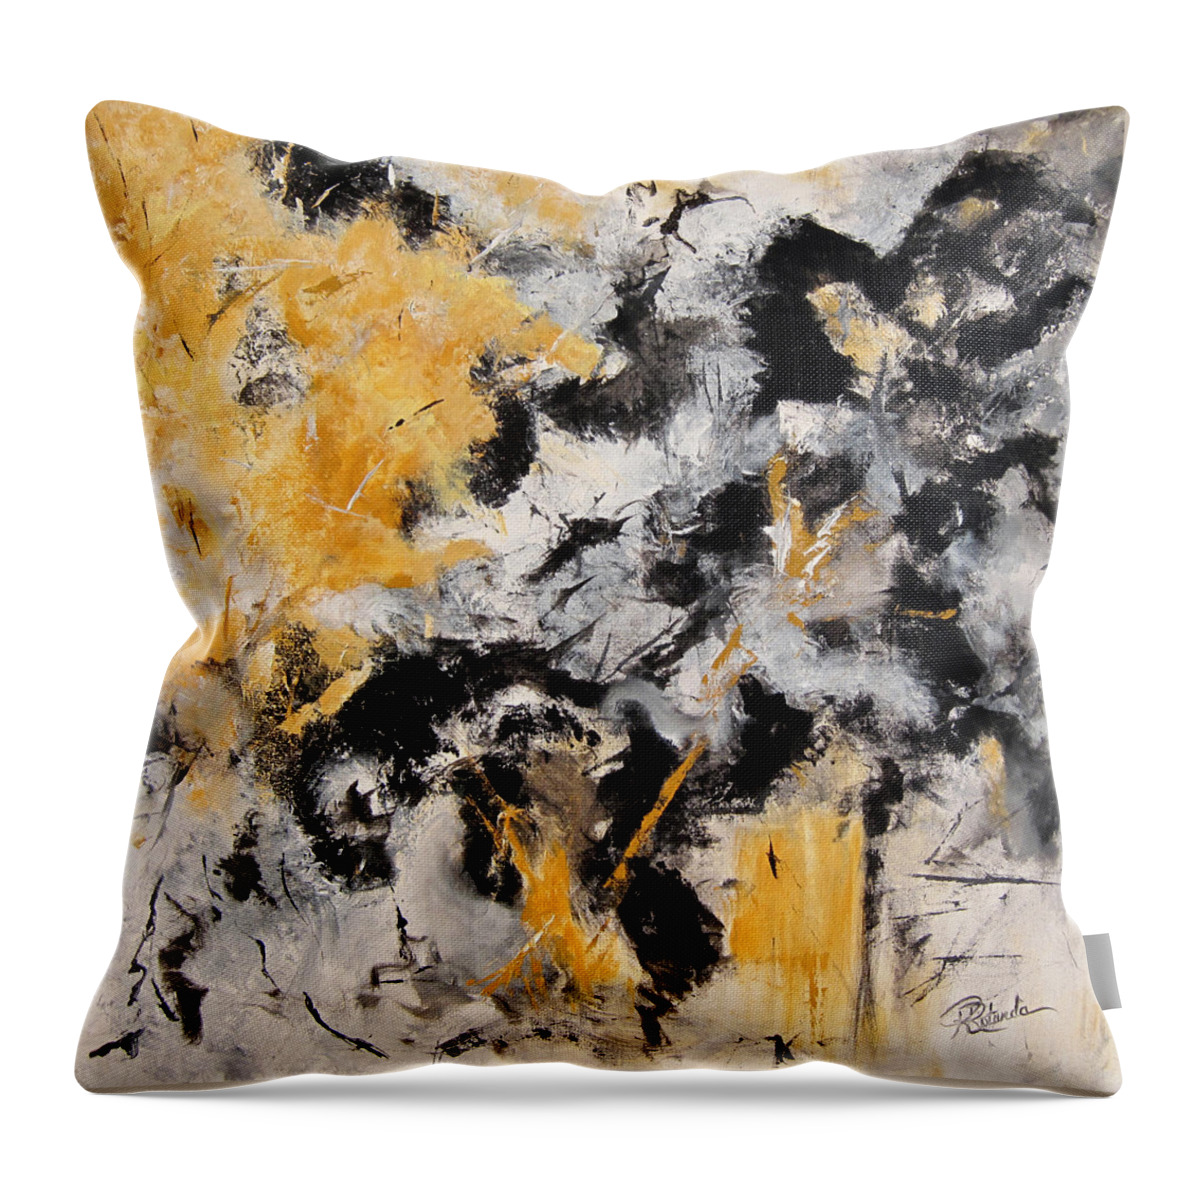 Yellows Throw Pillow featuring the painting Autumn Nights by Roberta Rotunda